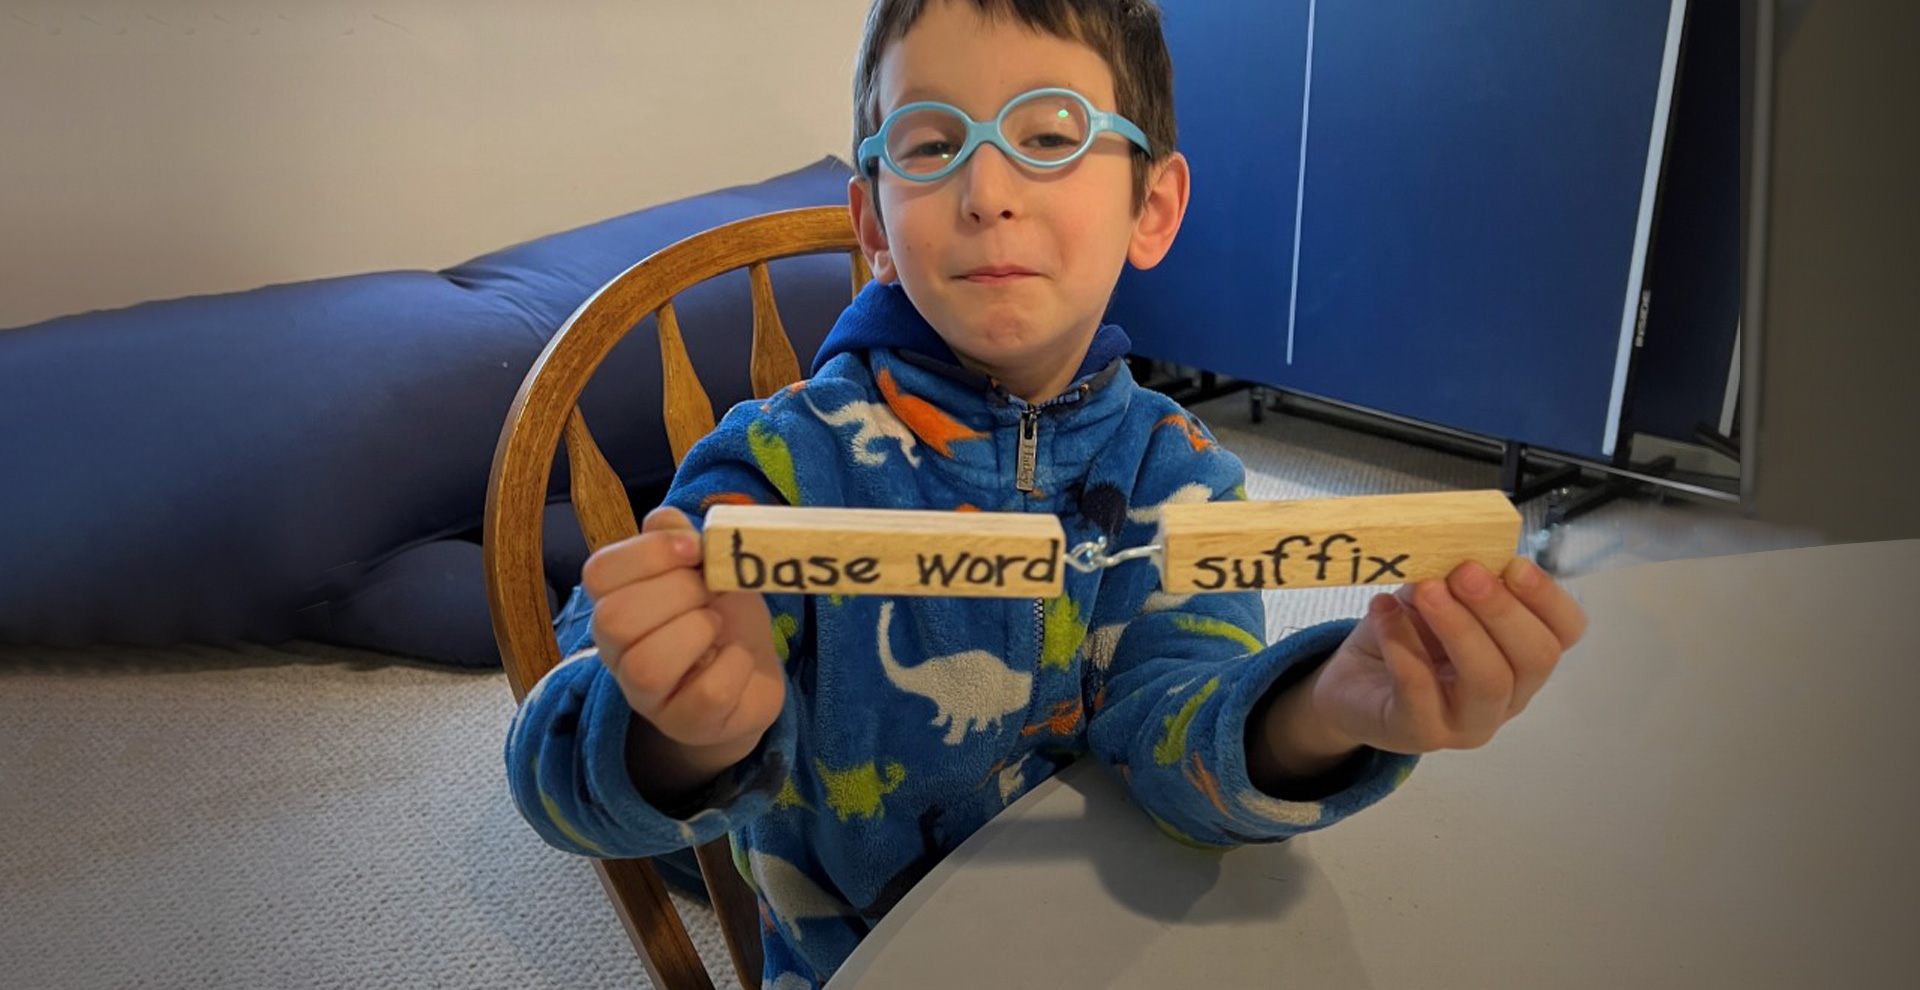 Student holds two connected wooden blocks. The first one says “base word” and the second says “suffix”